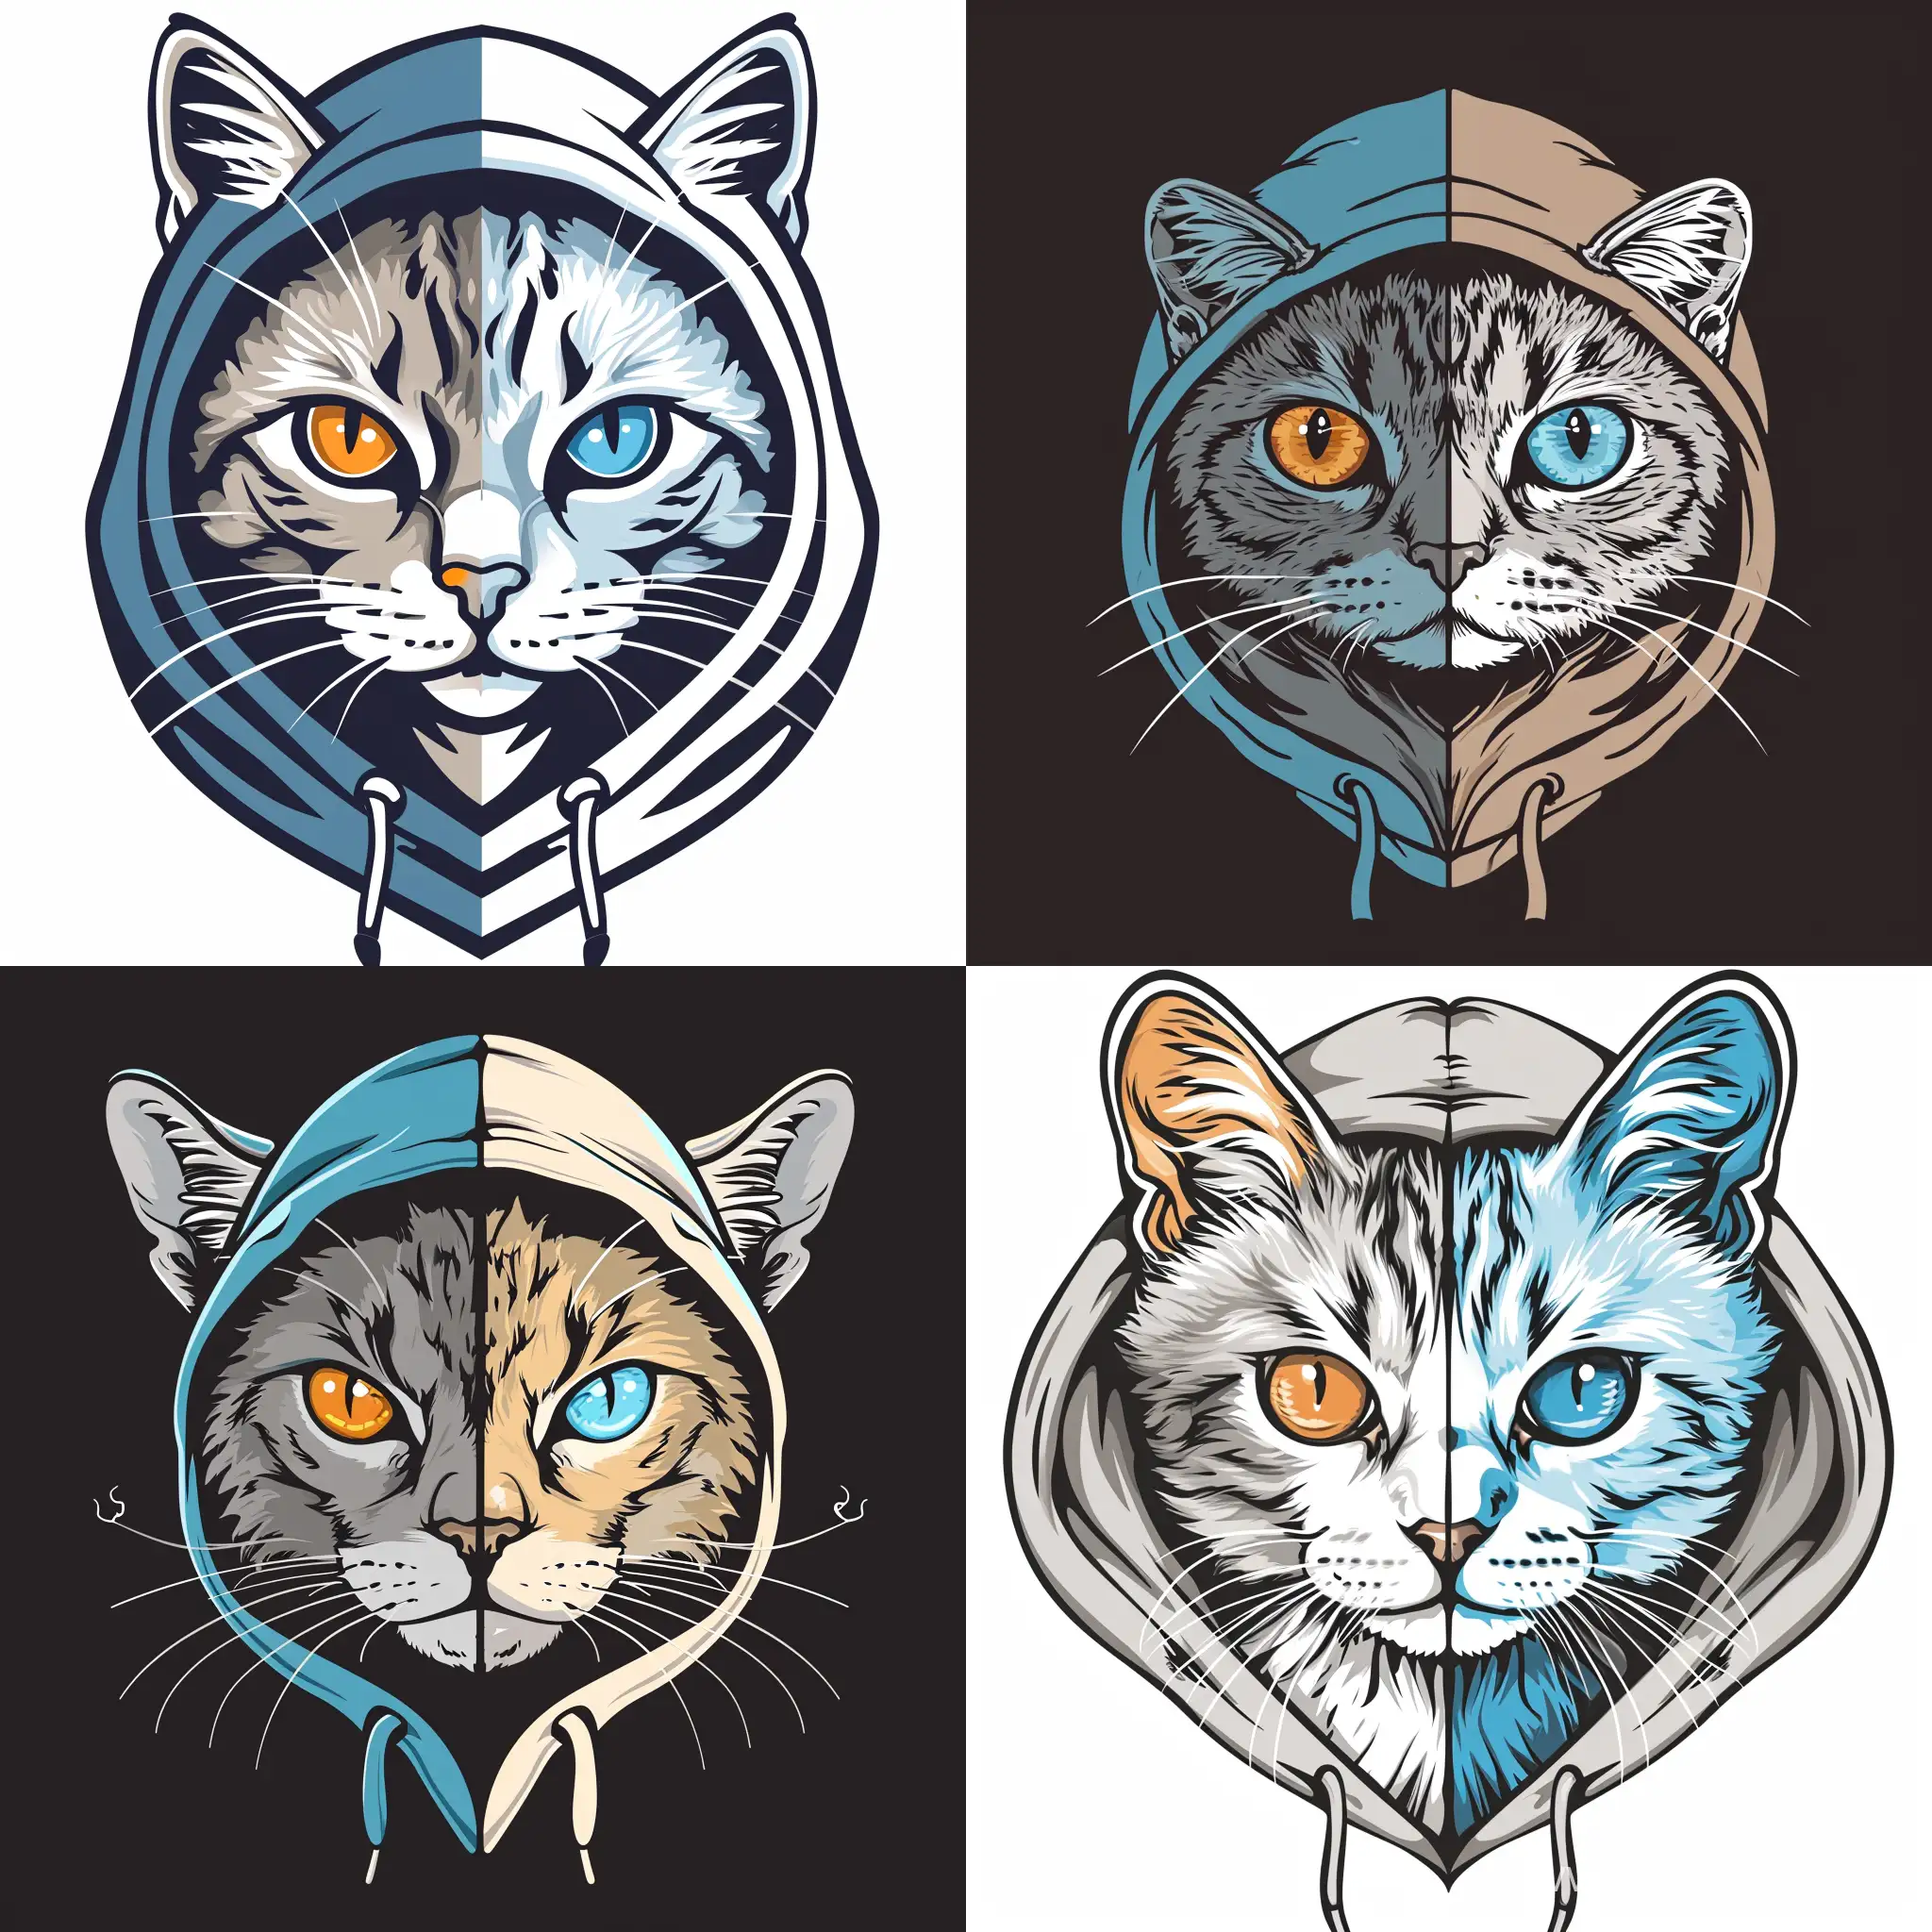 Create a logo of a cat with a symmetrical face – the left half featuring an amber-eyed, ears-drooping Scottish Fold Shorthair, and the right half showcasing a light blue-eyed British Shorthair Lynx Point wearing a hoodie